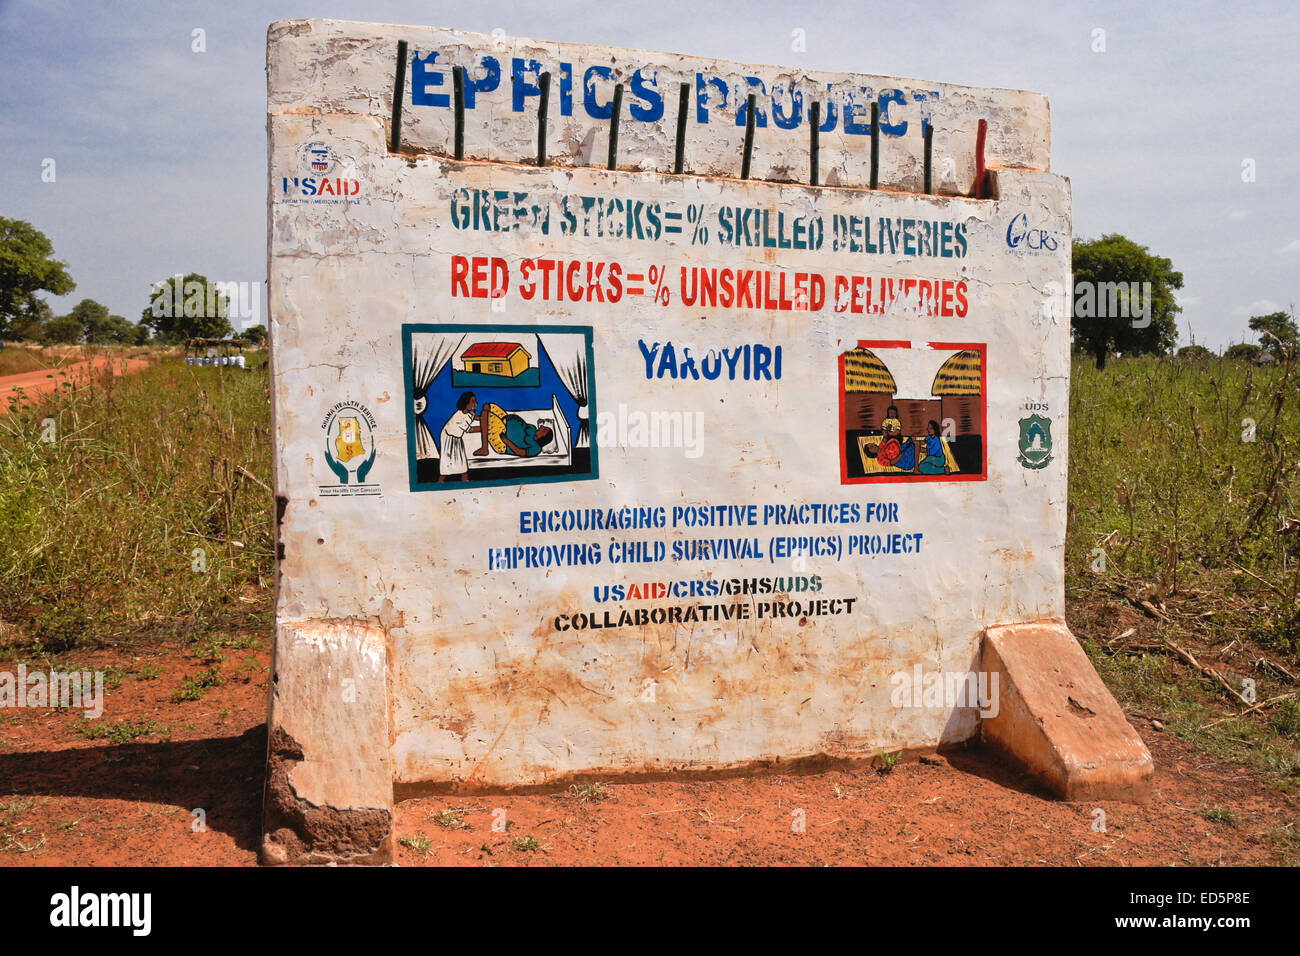 Sign regarding childbirth in clinics vs. in villages, northern Ghana Stock Photo